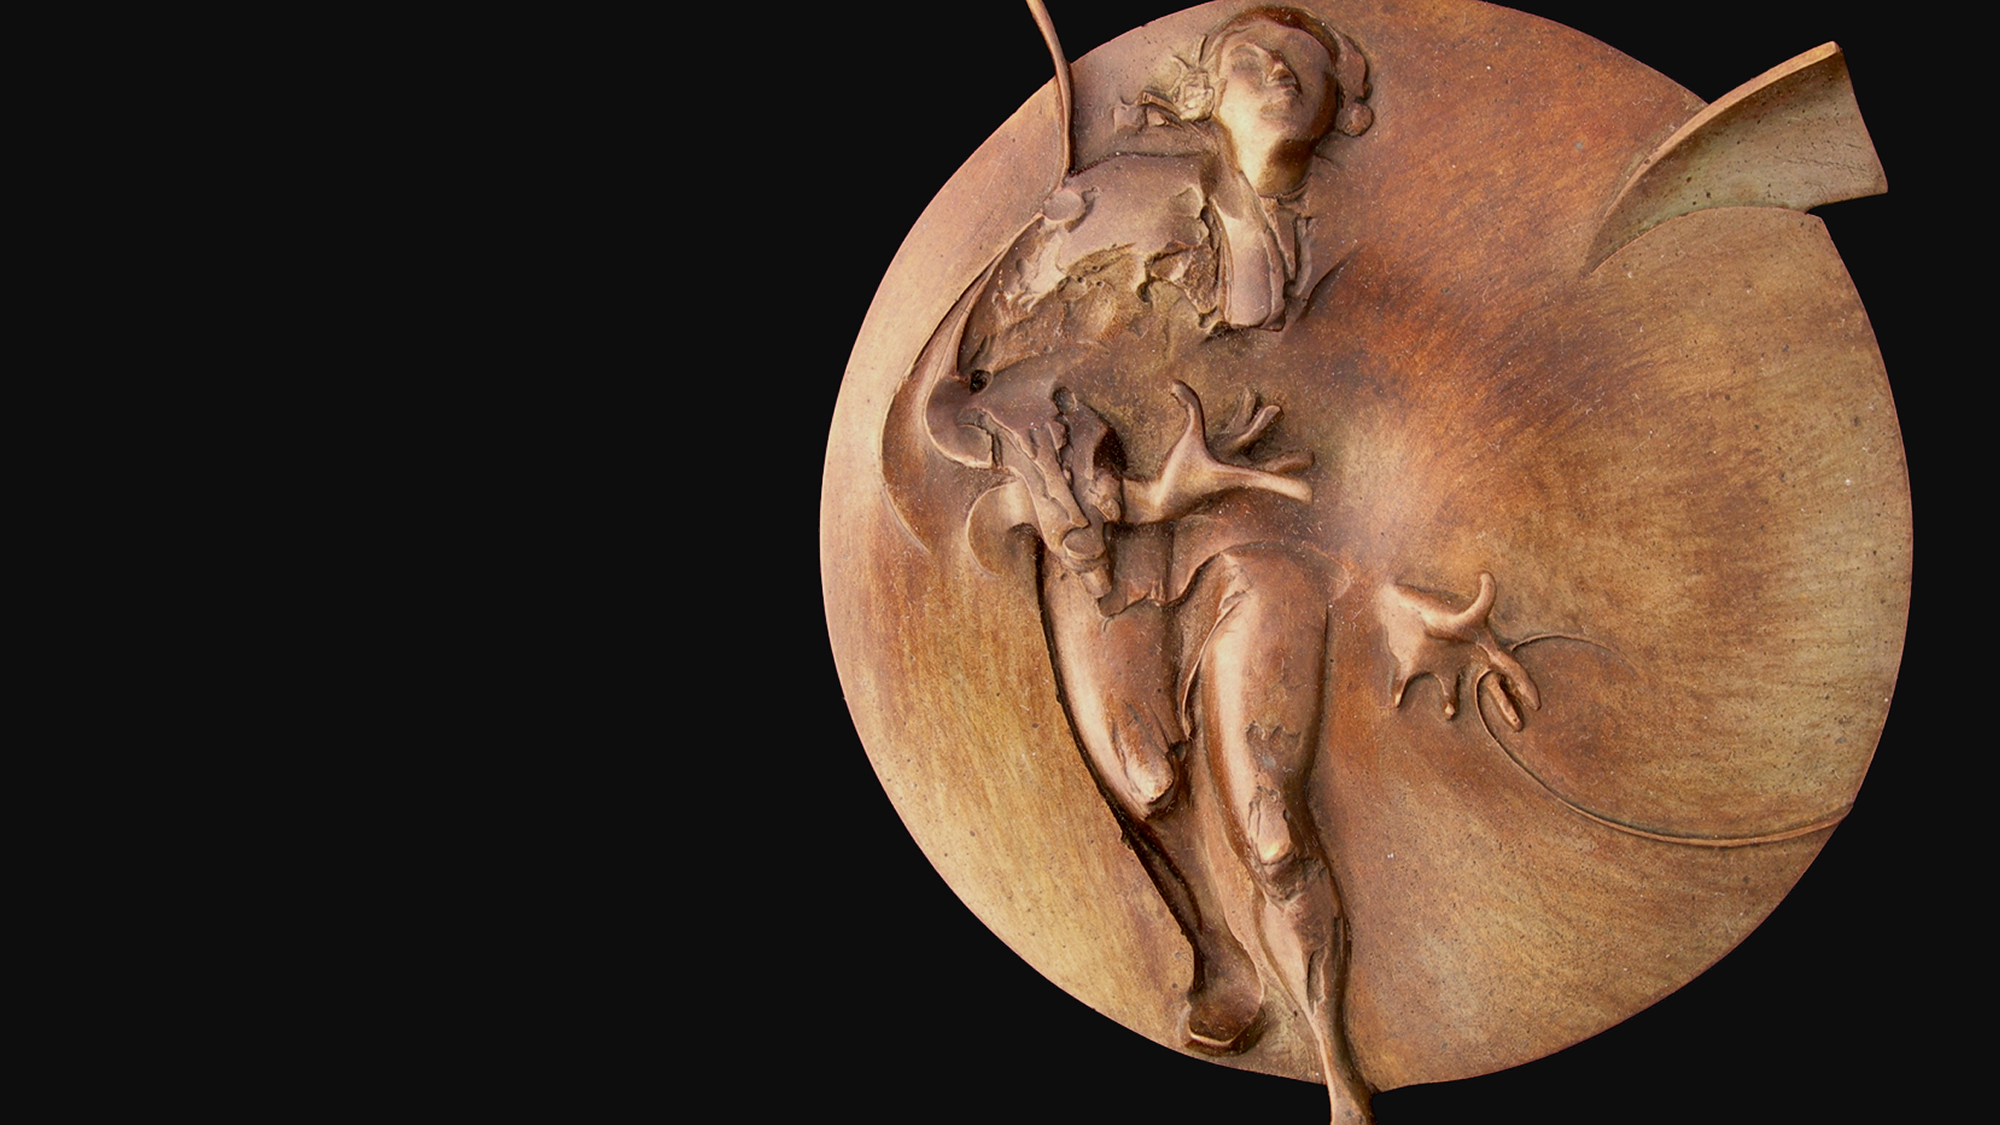 Long Table 121. Today’s Art Medal—From Decoration to Handheld Sculpture